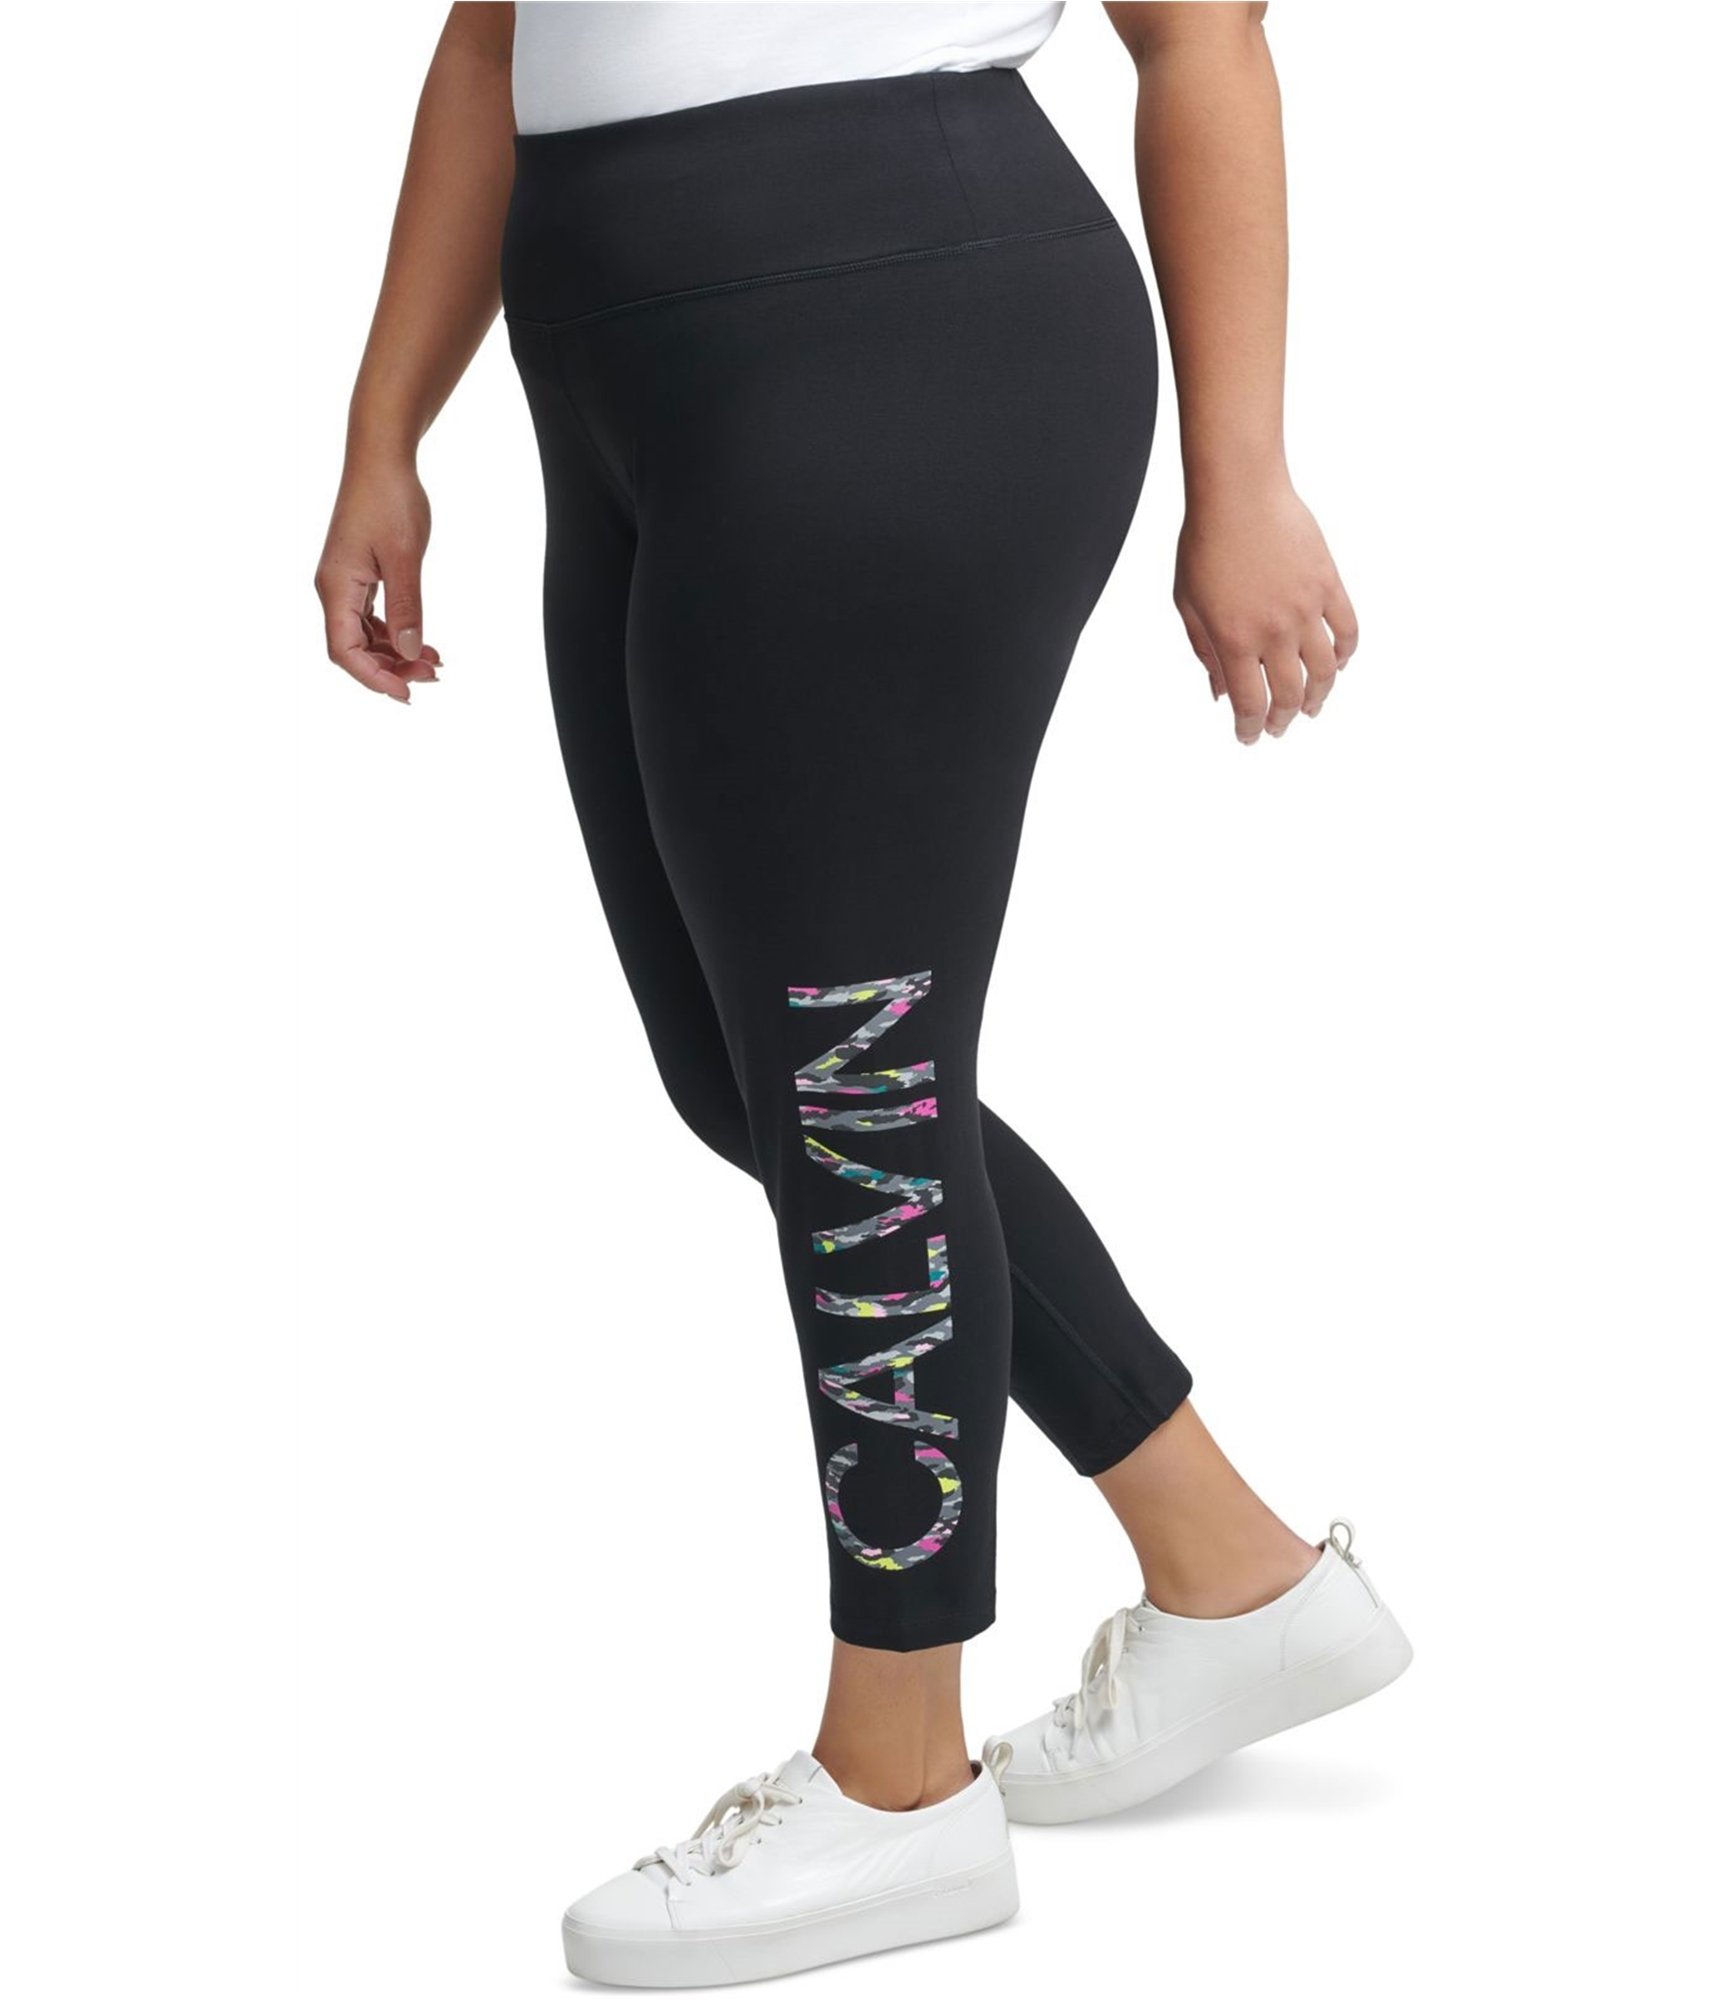 Buy a Calvin Klein Womens Wildcat Compression Athletic Pants